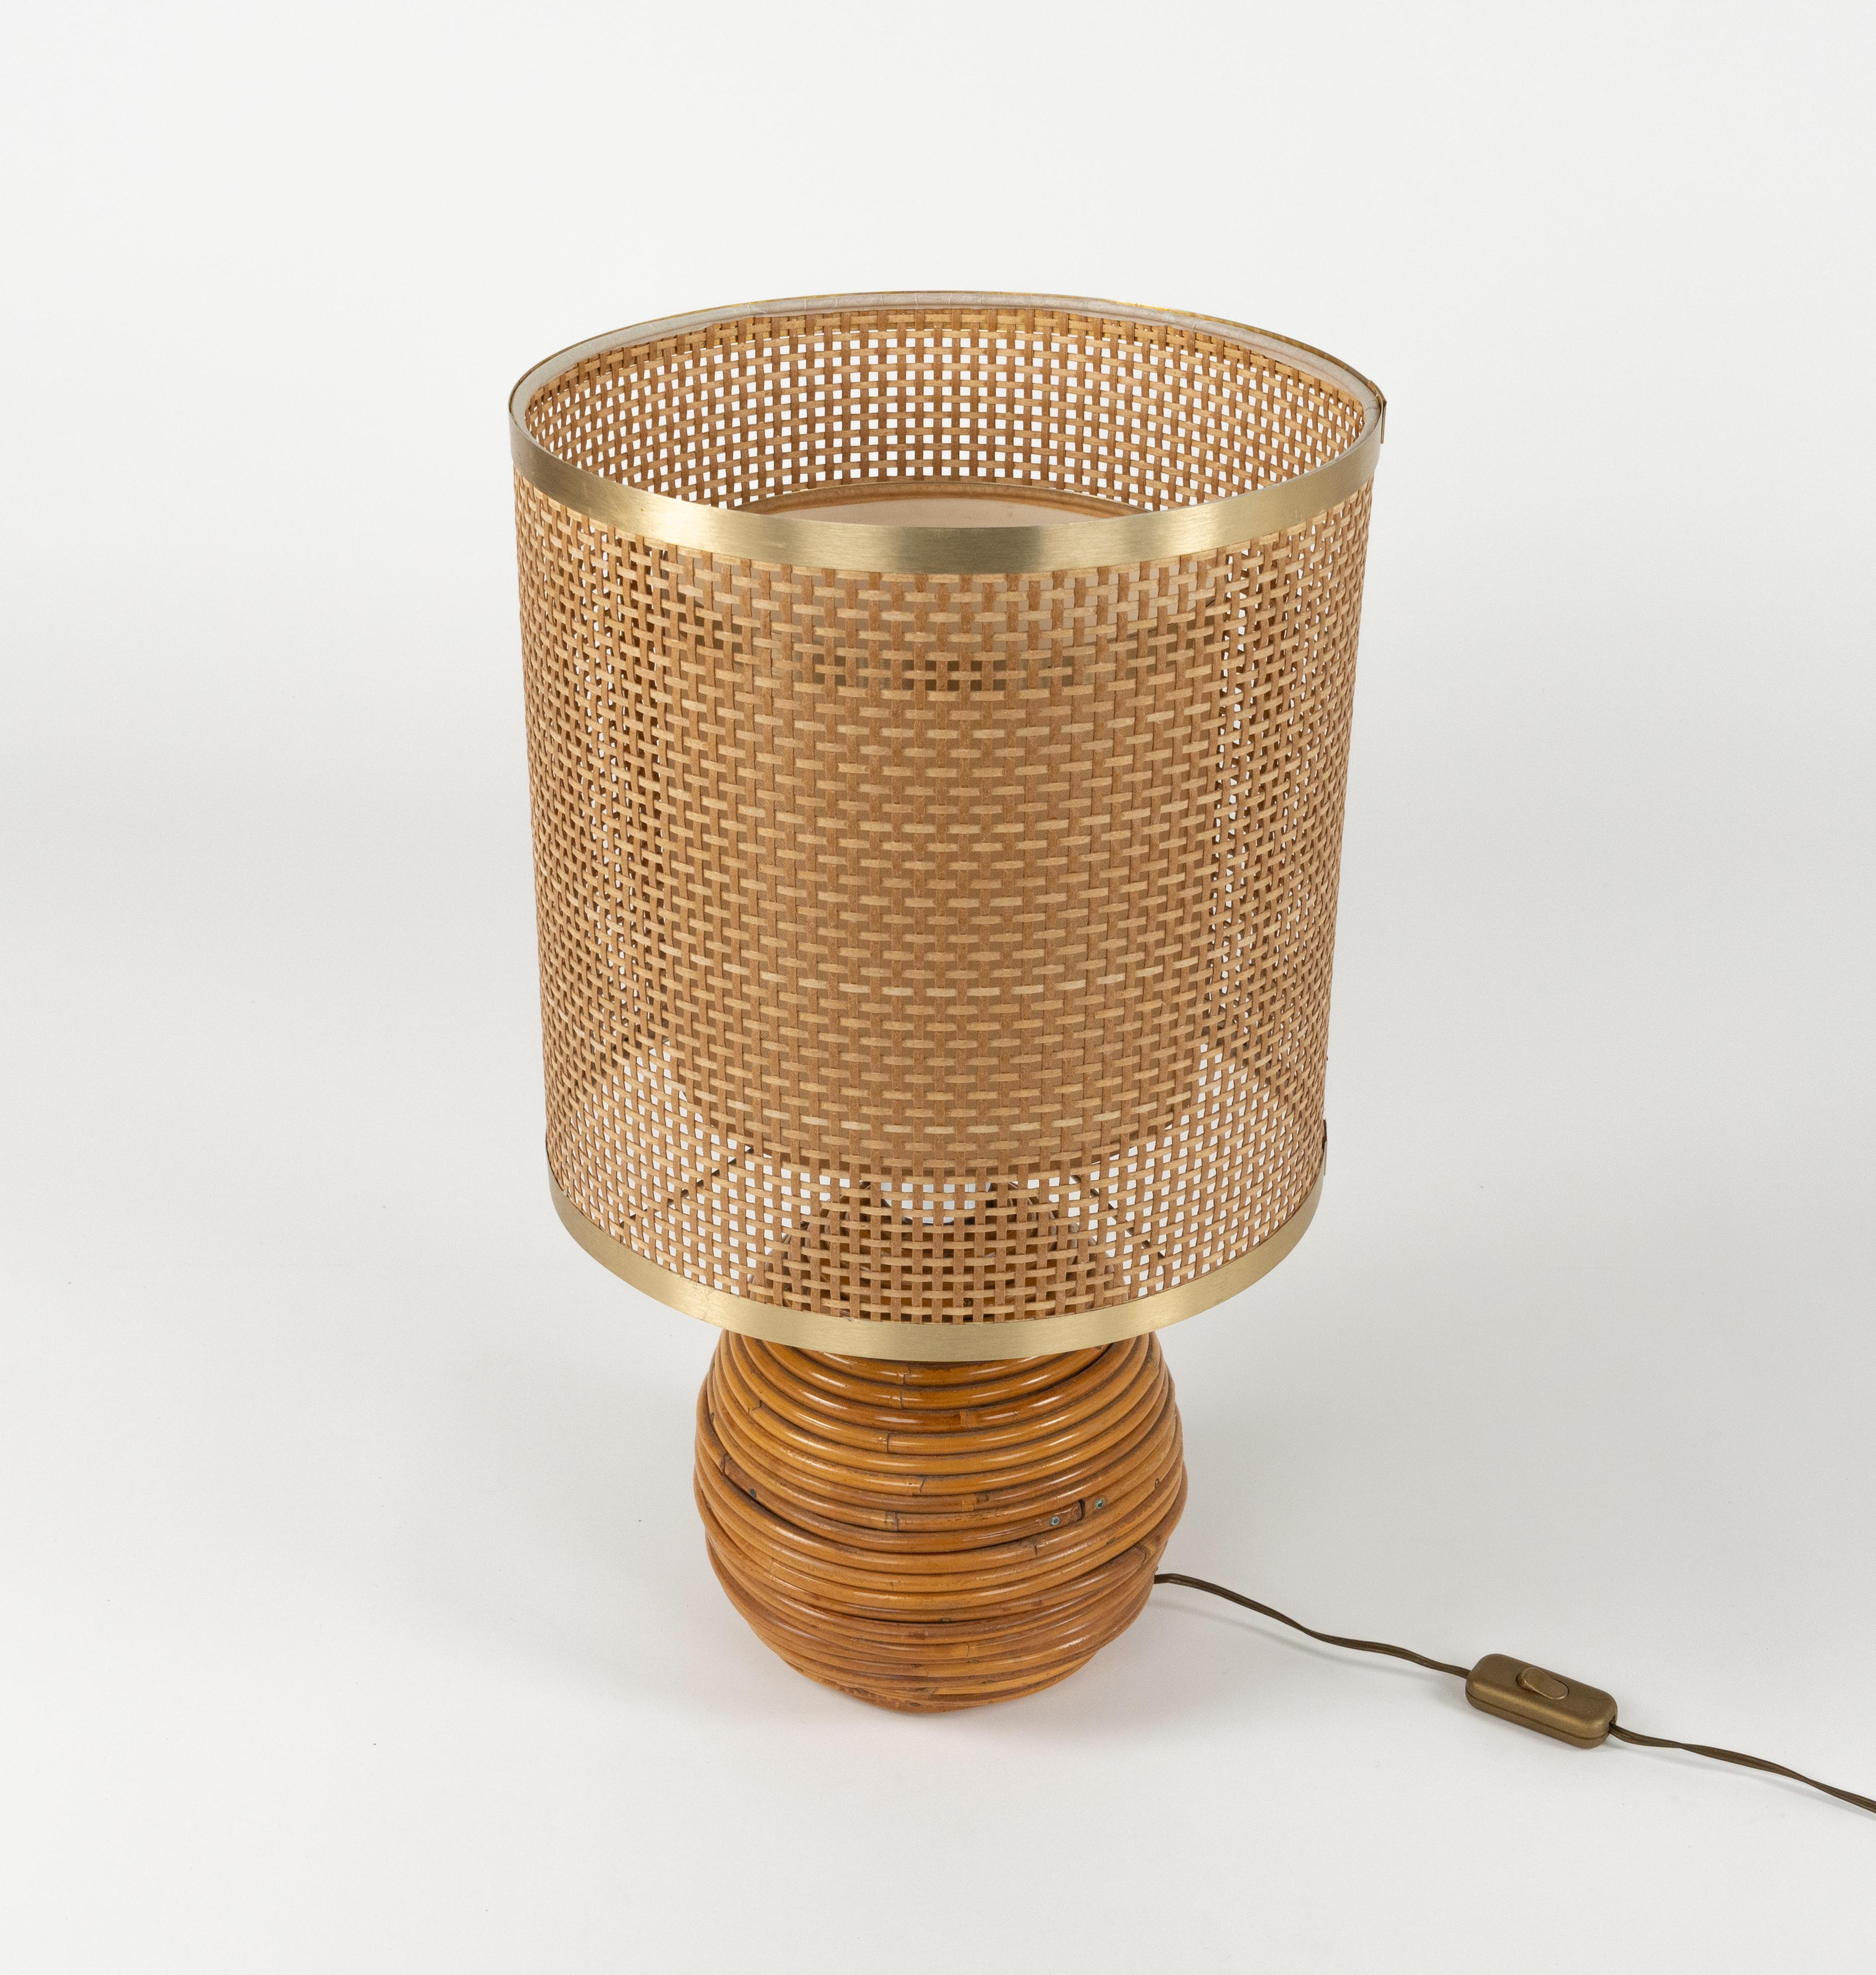 Midcentury Rattan, Wicker and Chrome Table Lamp by Vivai Del Sud, Italy 1970s For Sale 6